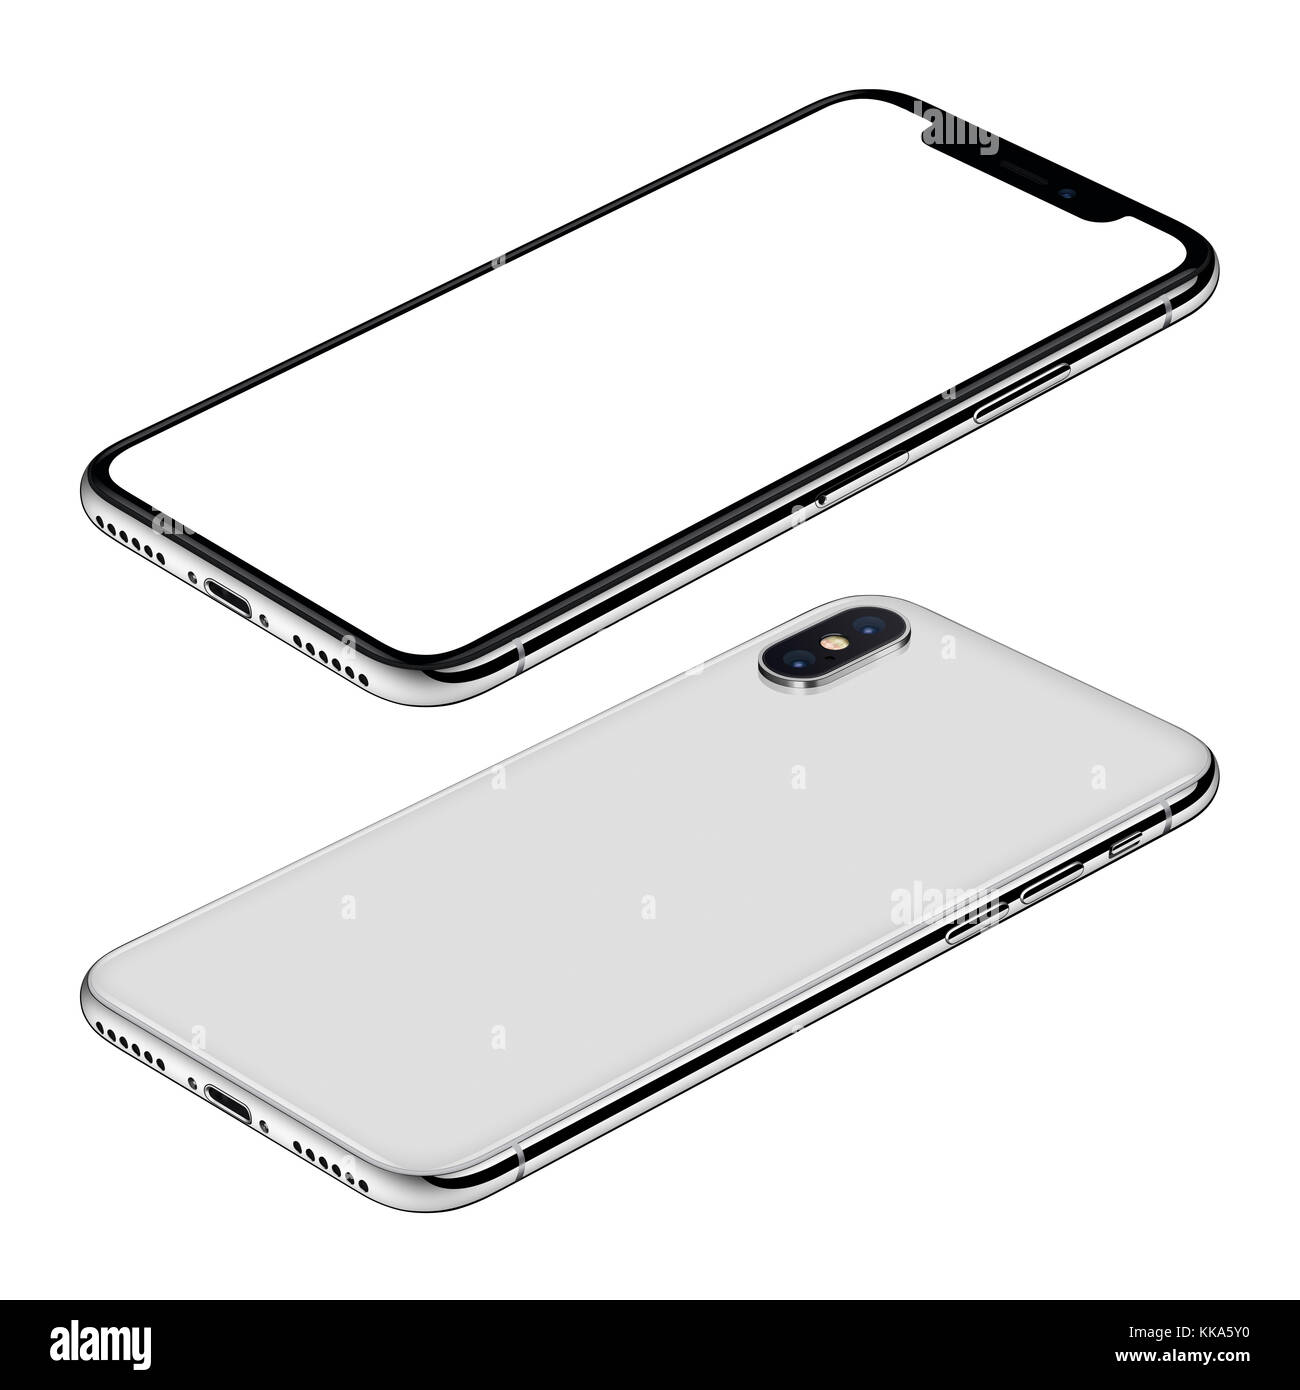 Download White smartphone mockup similar to iPhone X front and back ...